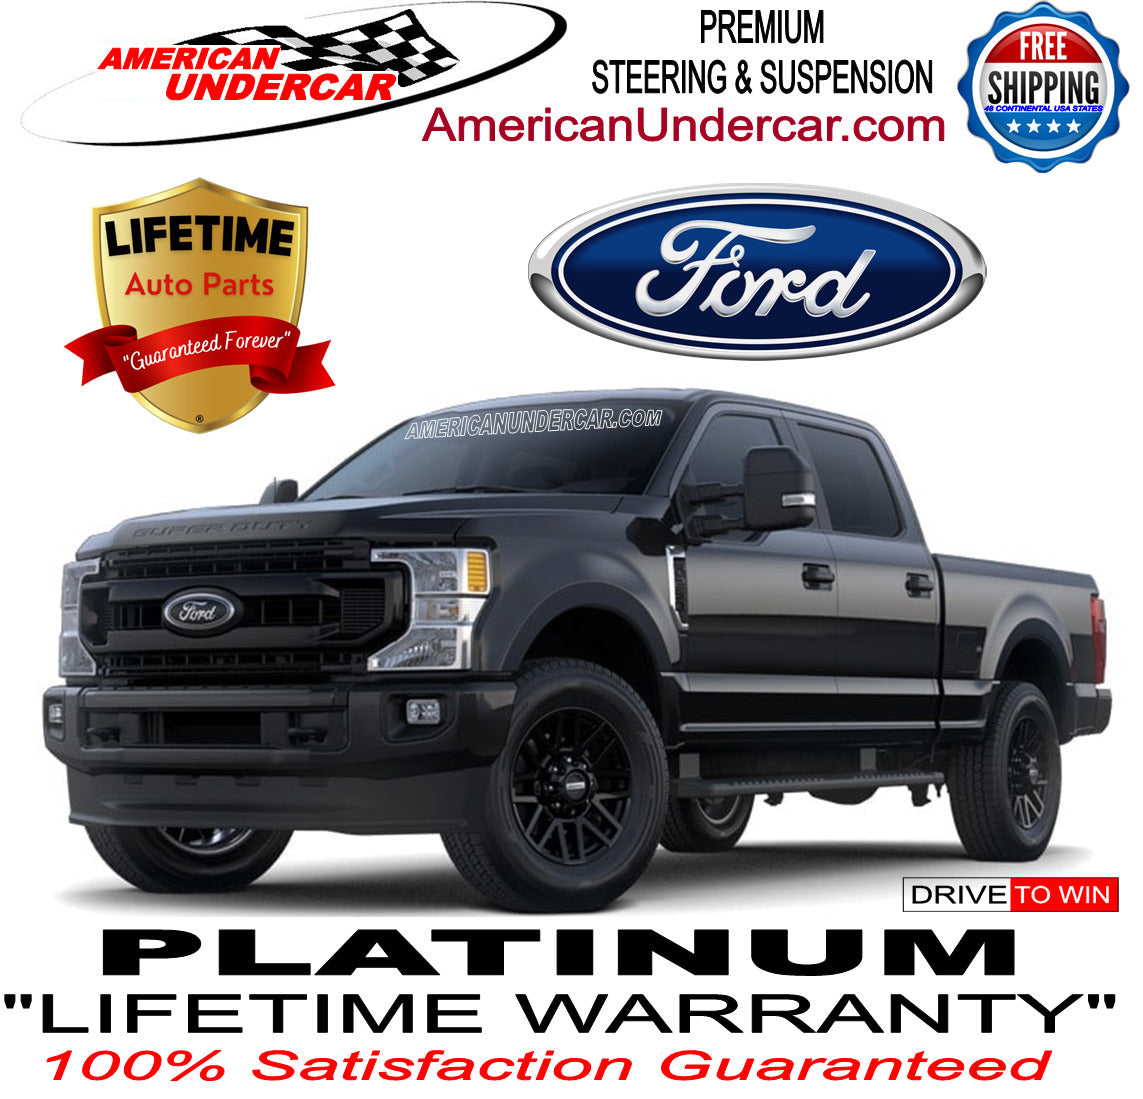 Lifetime Steering and Suspension Kit for 2011-2016 Ford F450 Super Duty 4x4